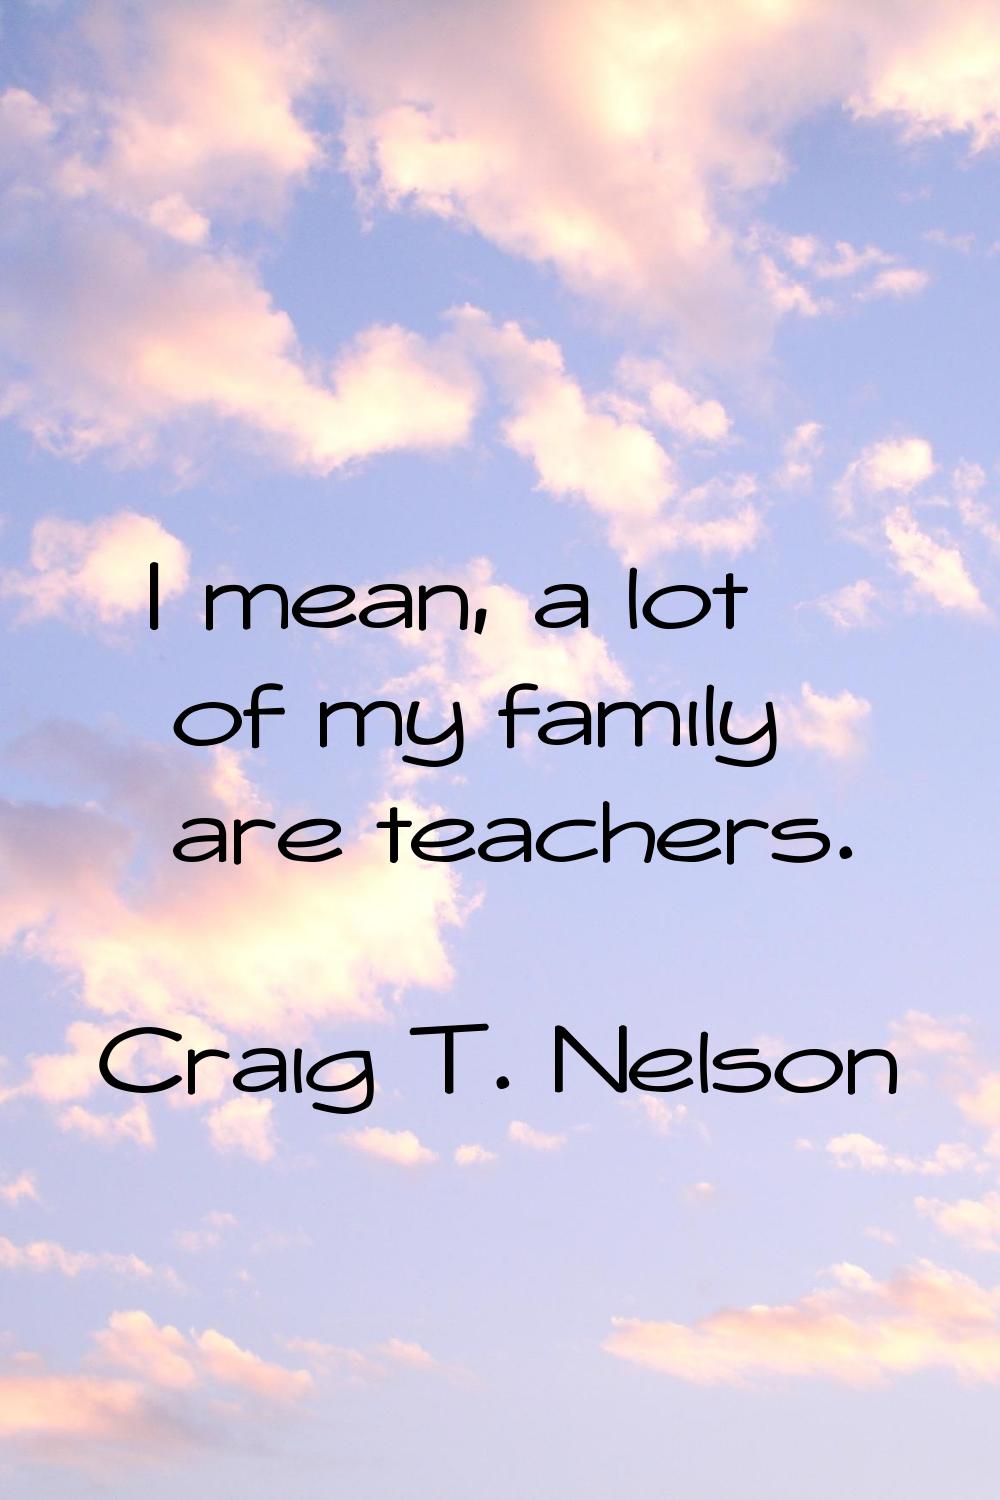 I mean, a lot of my family are teachers.